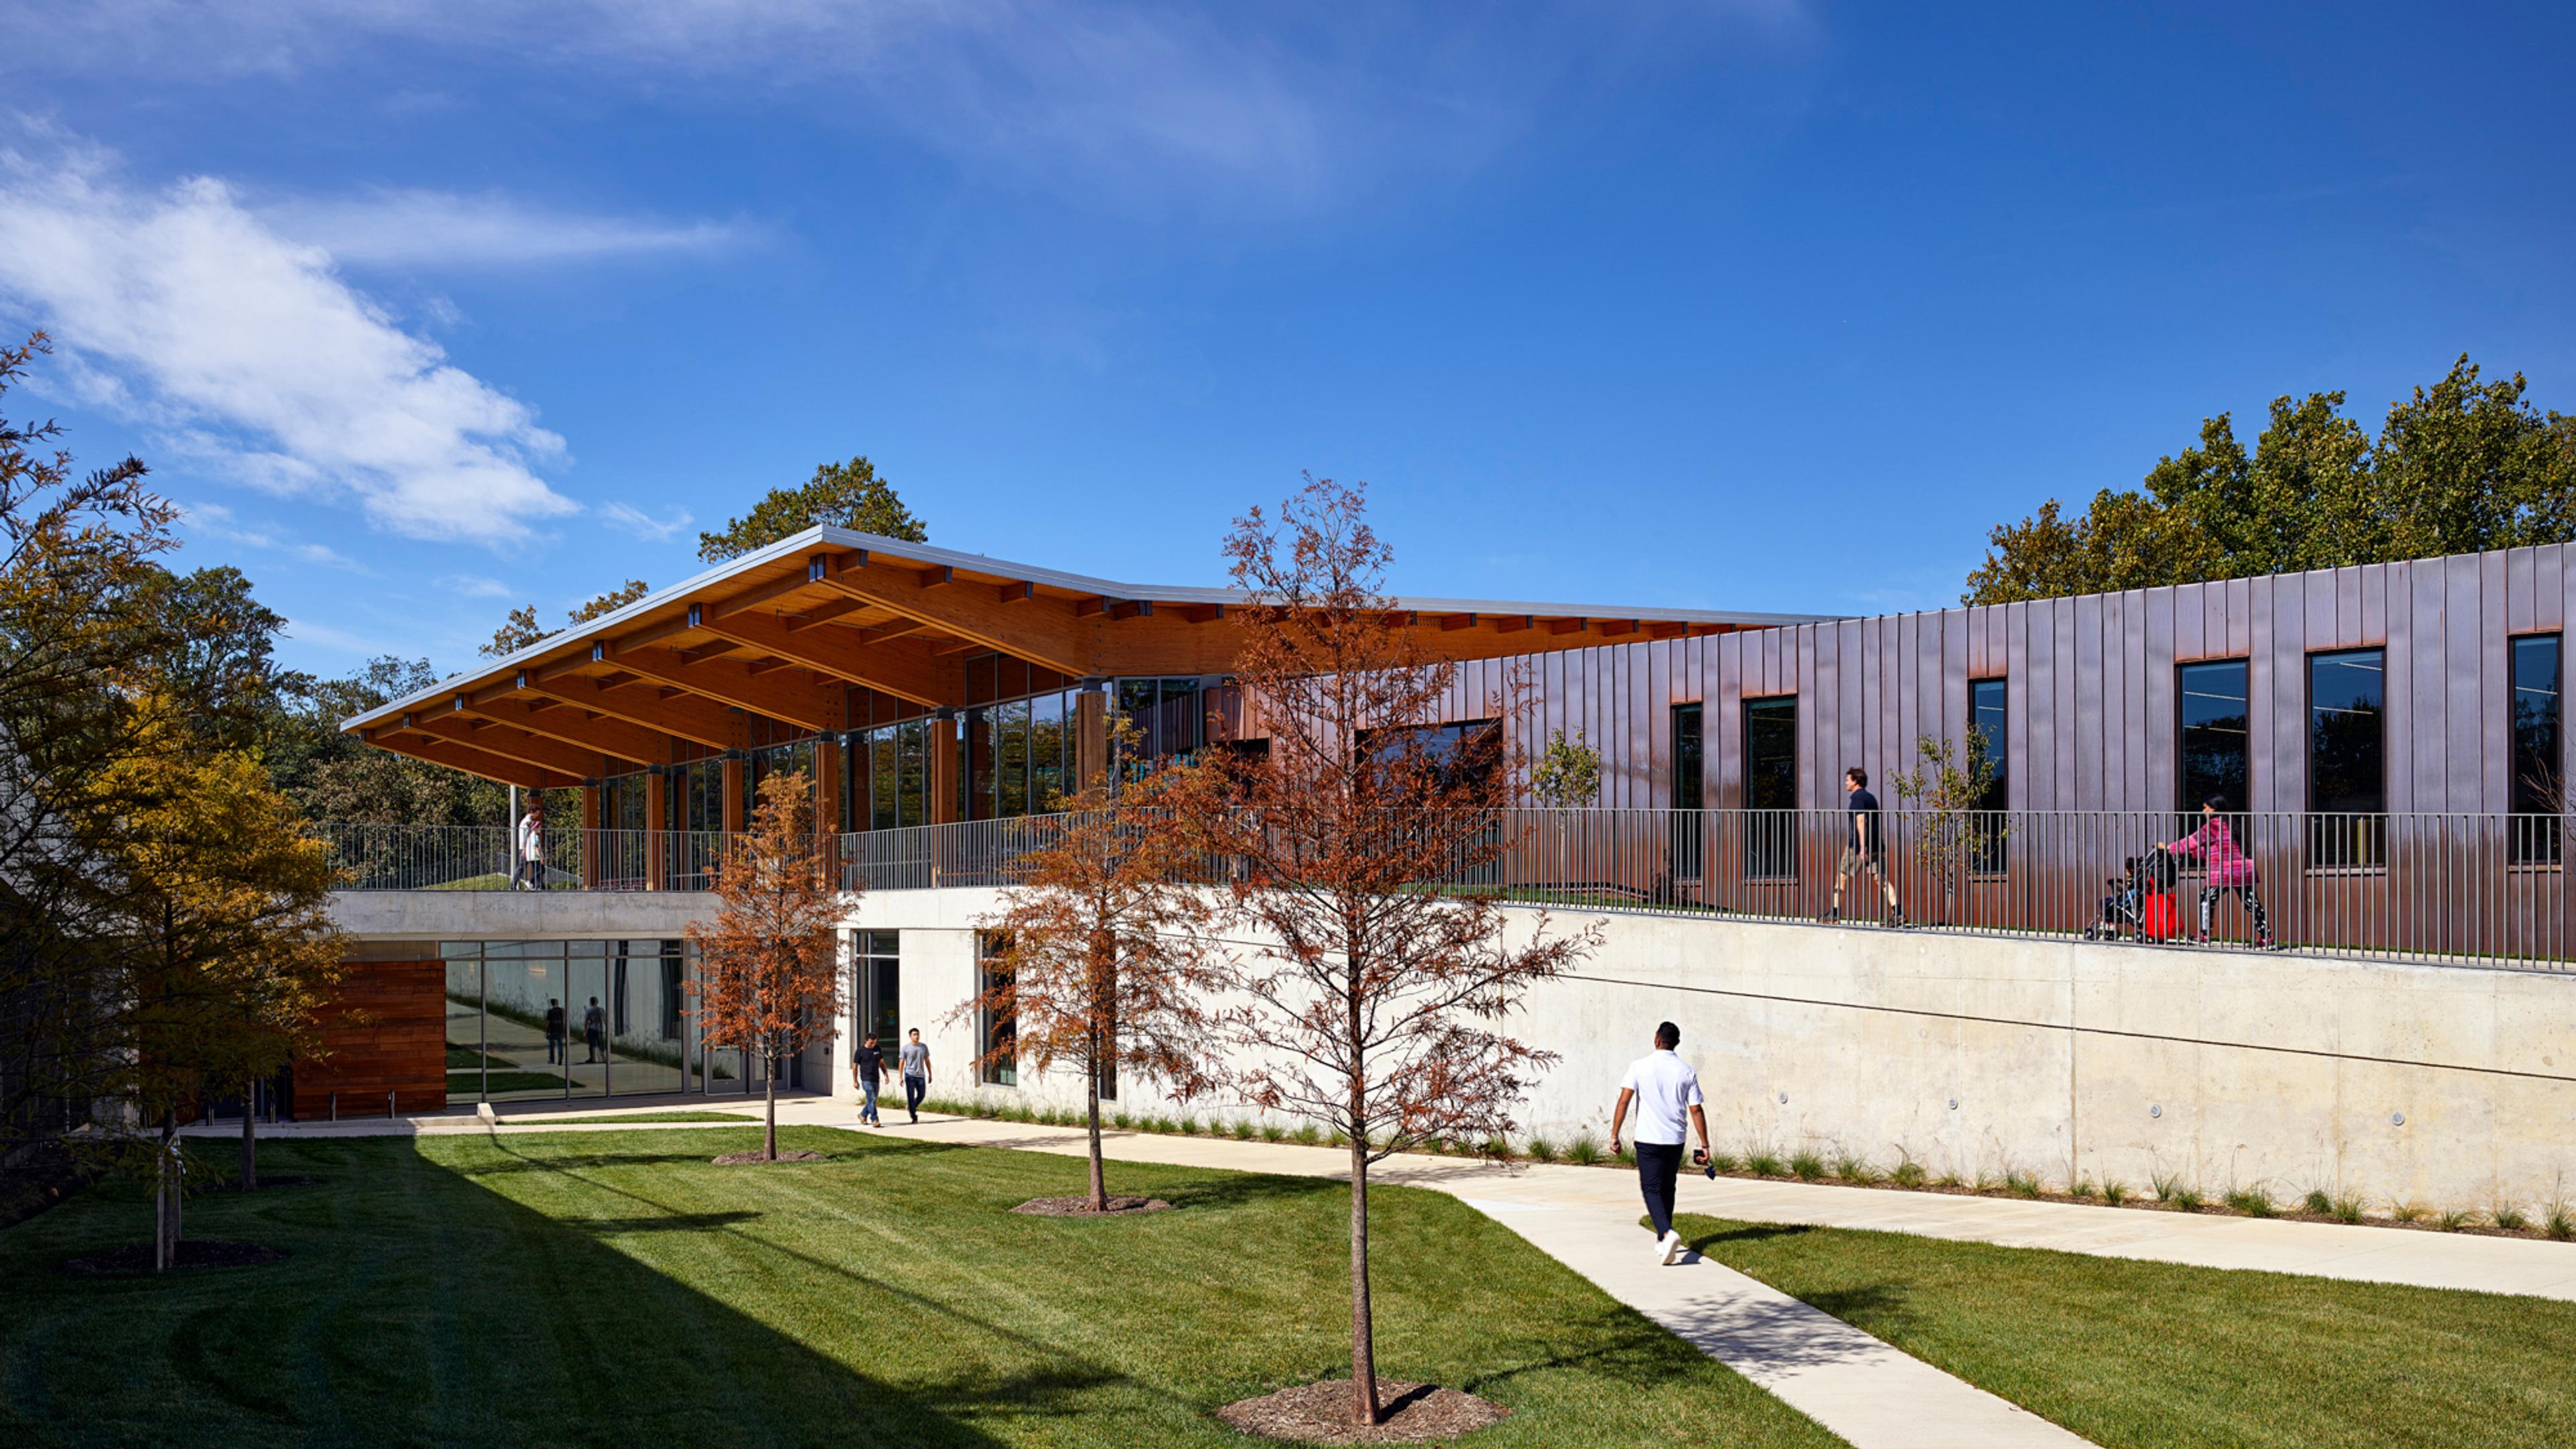 an image of the copper siding on the Lubber Run Community Center in Arlington, VA